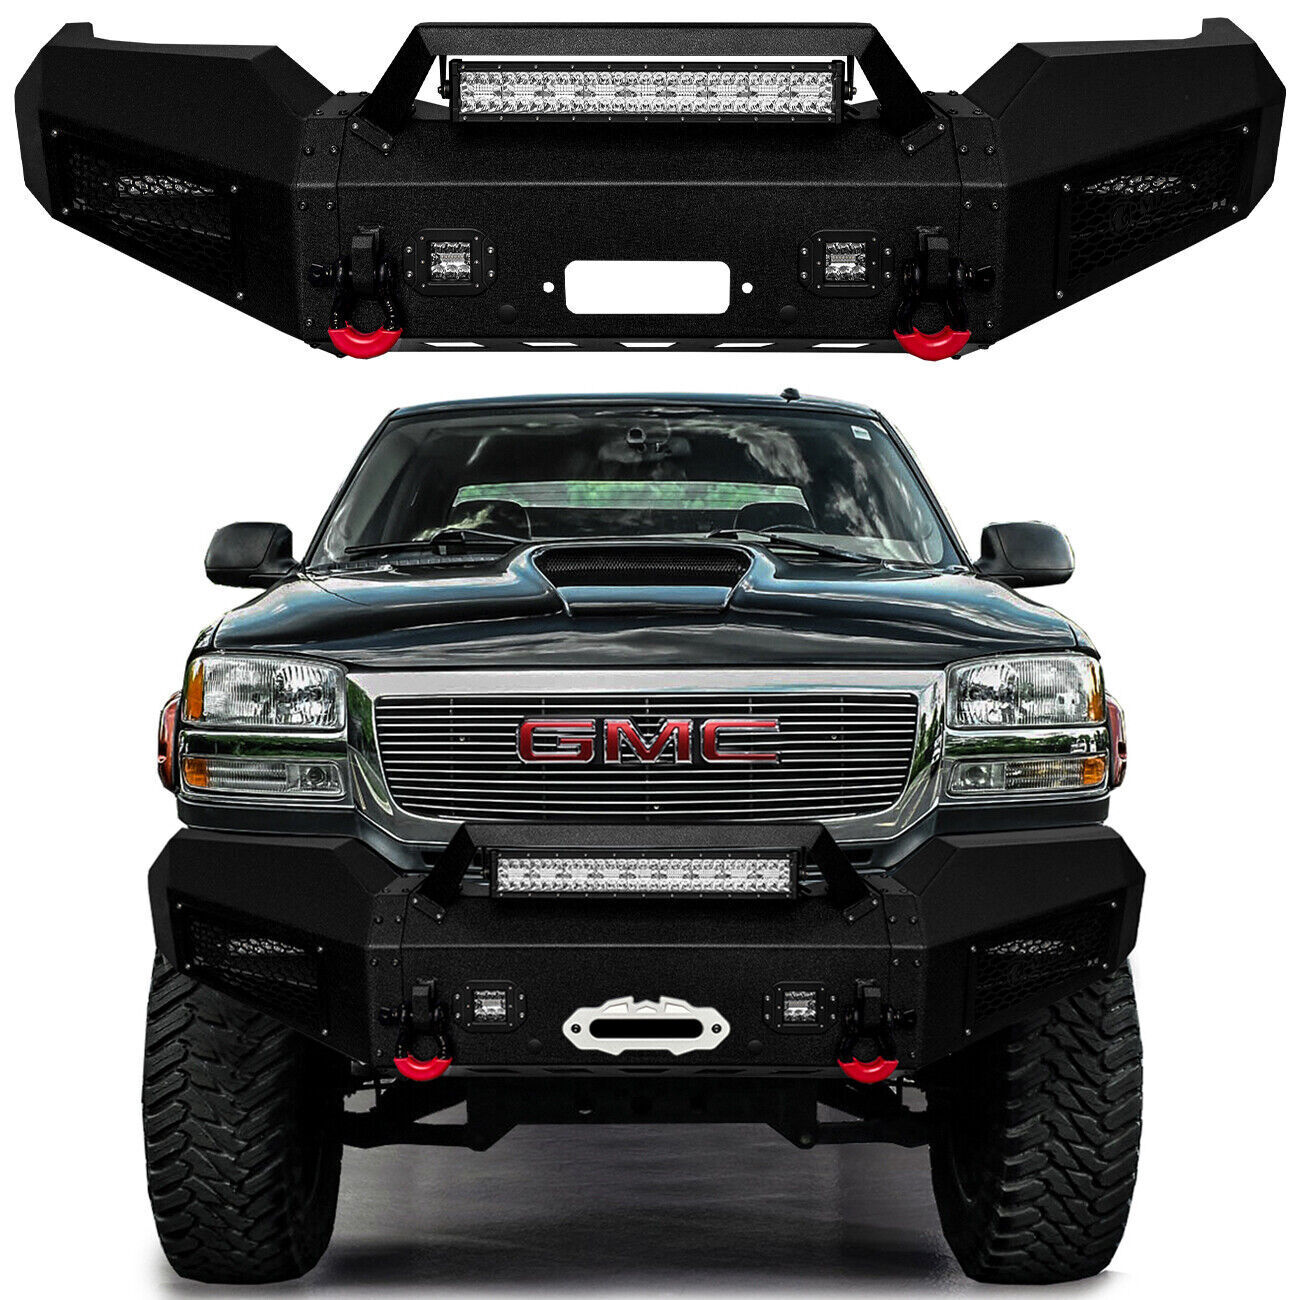 Vijay Fits 2003-2006 GMC Sierra 2500/3500 Front or Rear Bumper with LED Lights